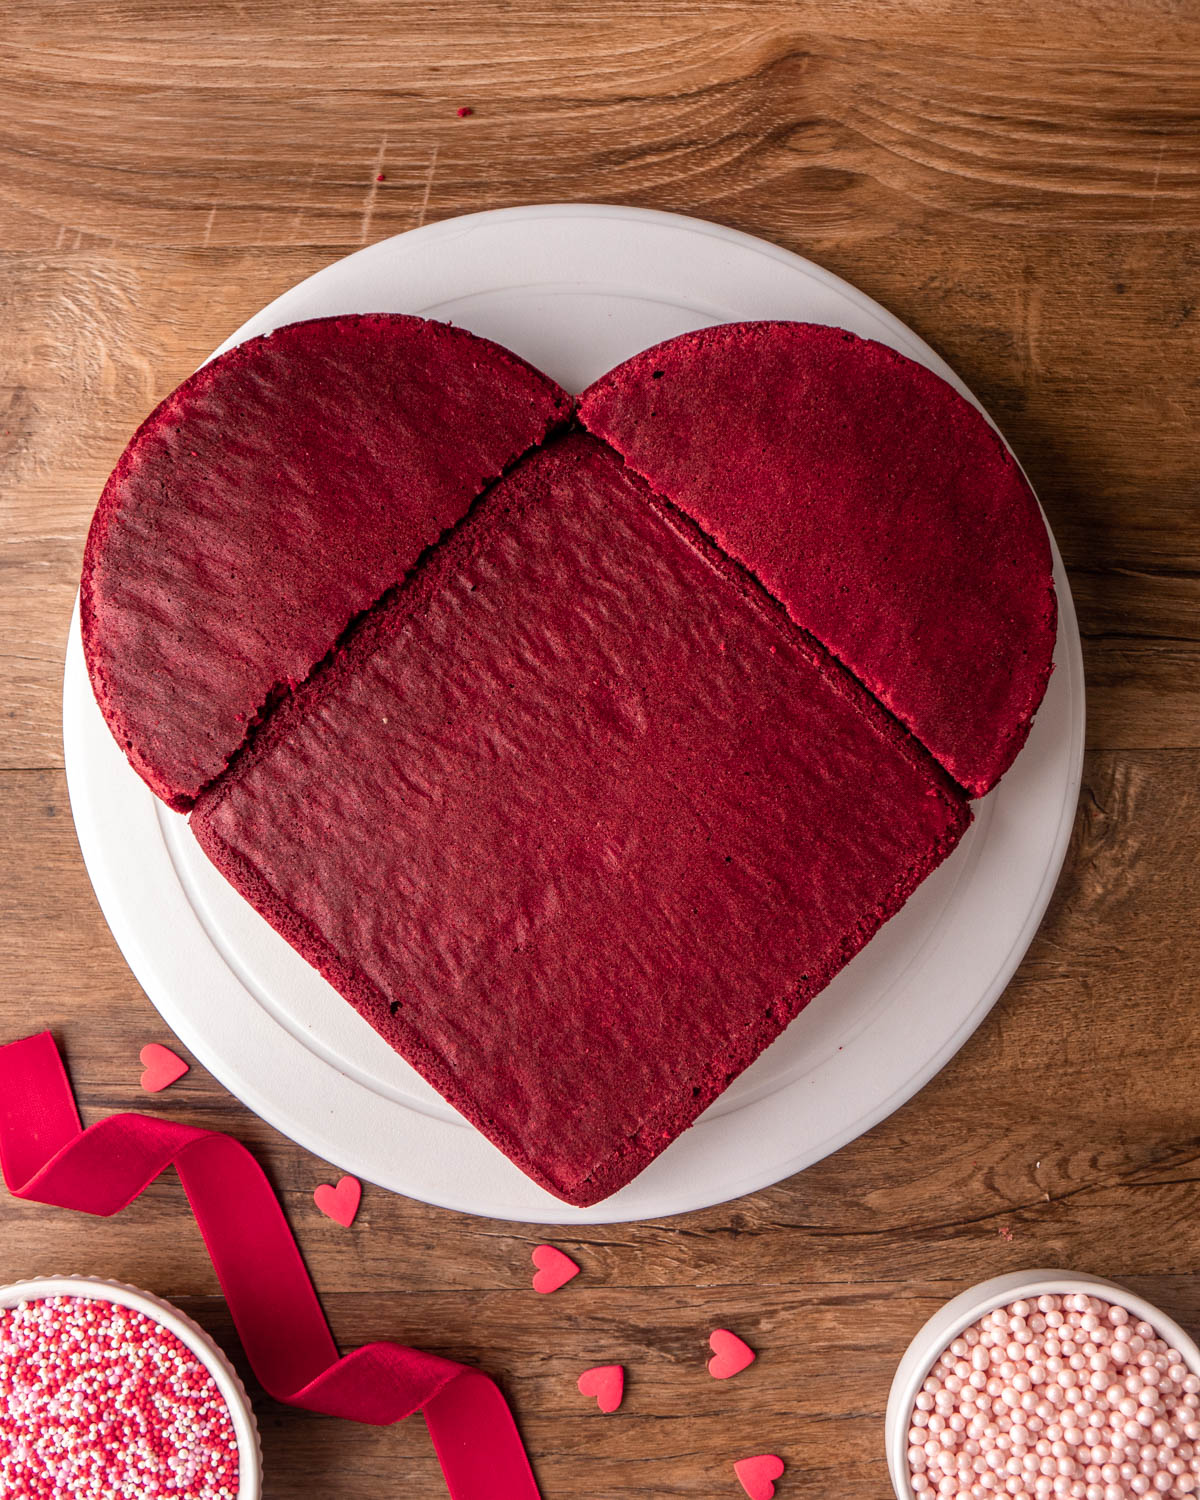 round cake cut in half and placed around square cake to form a heart